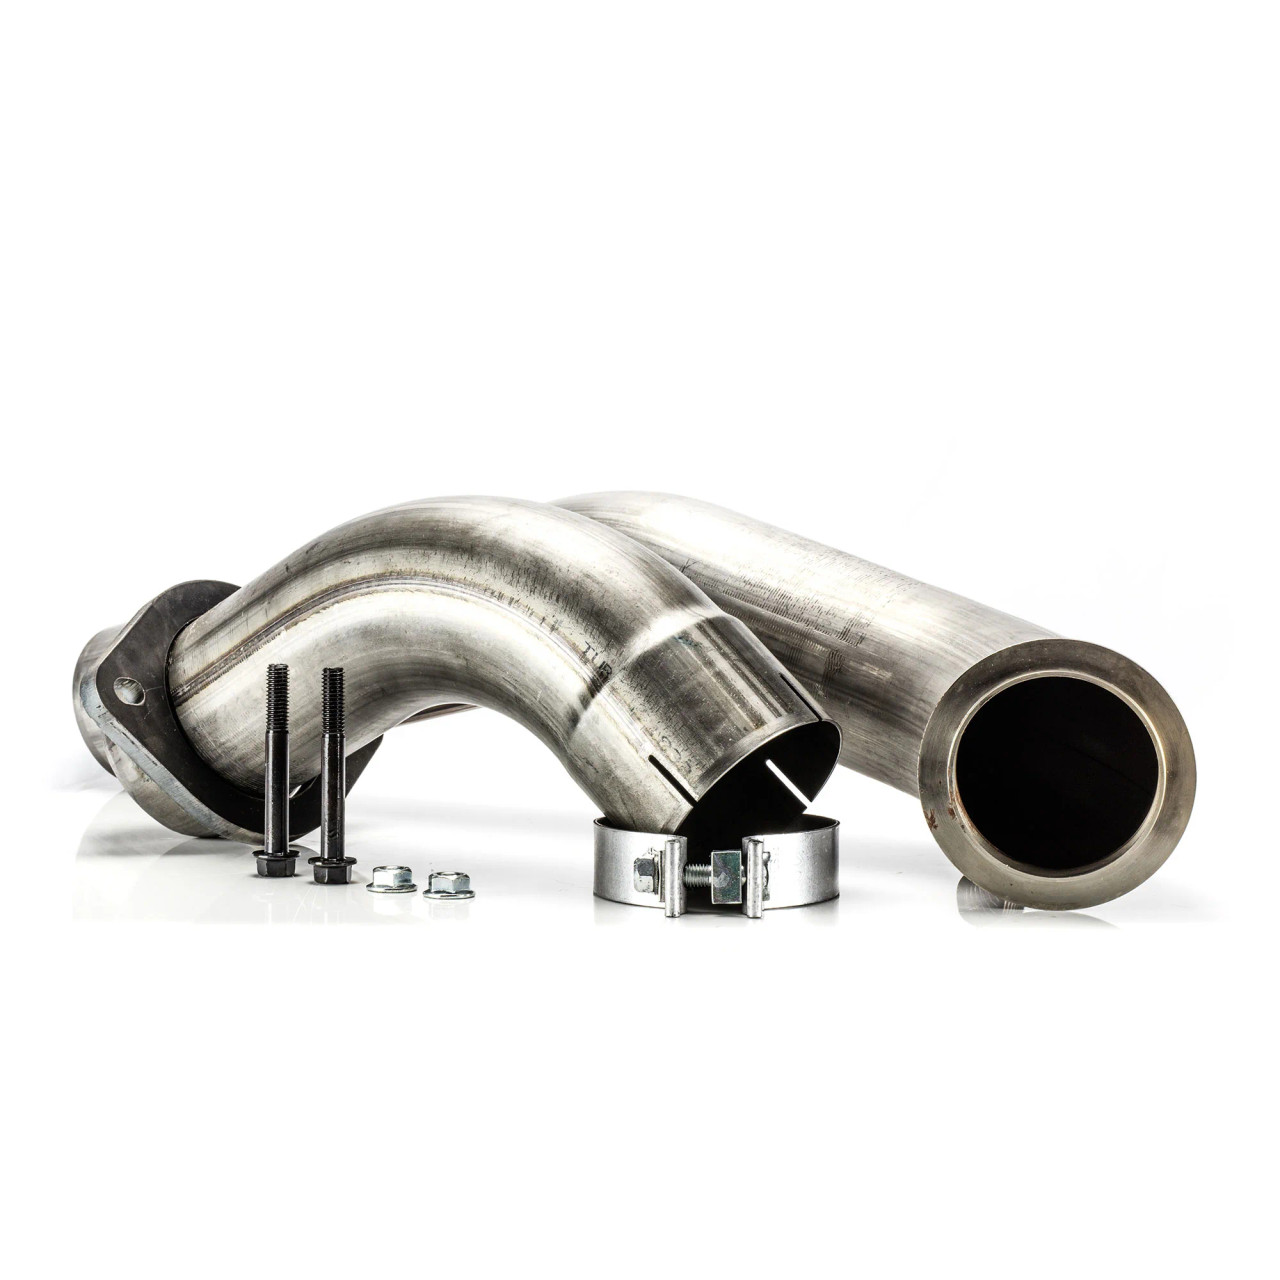 River City Diesel 4" S300/S400 409 Stainless Steel Down Tube for 2008 to 2010 Ford 6.4L Powerstroke - Main View